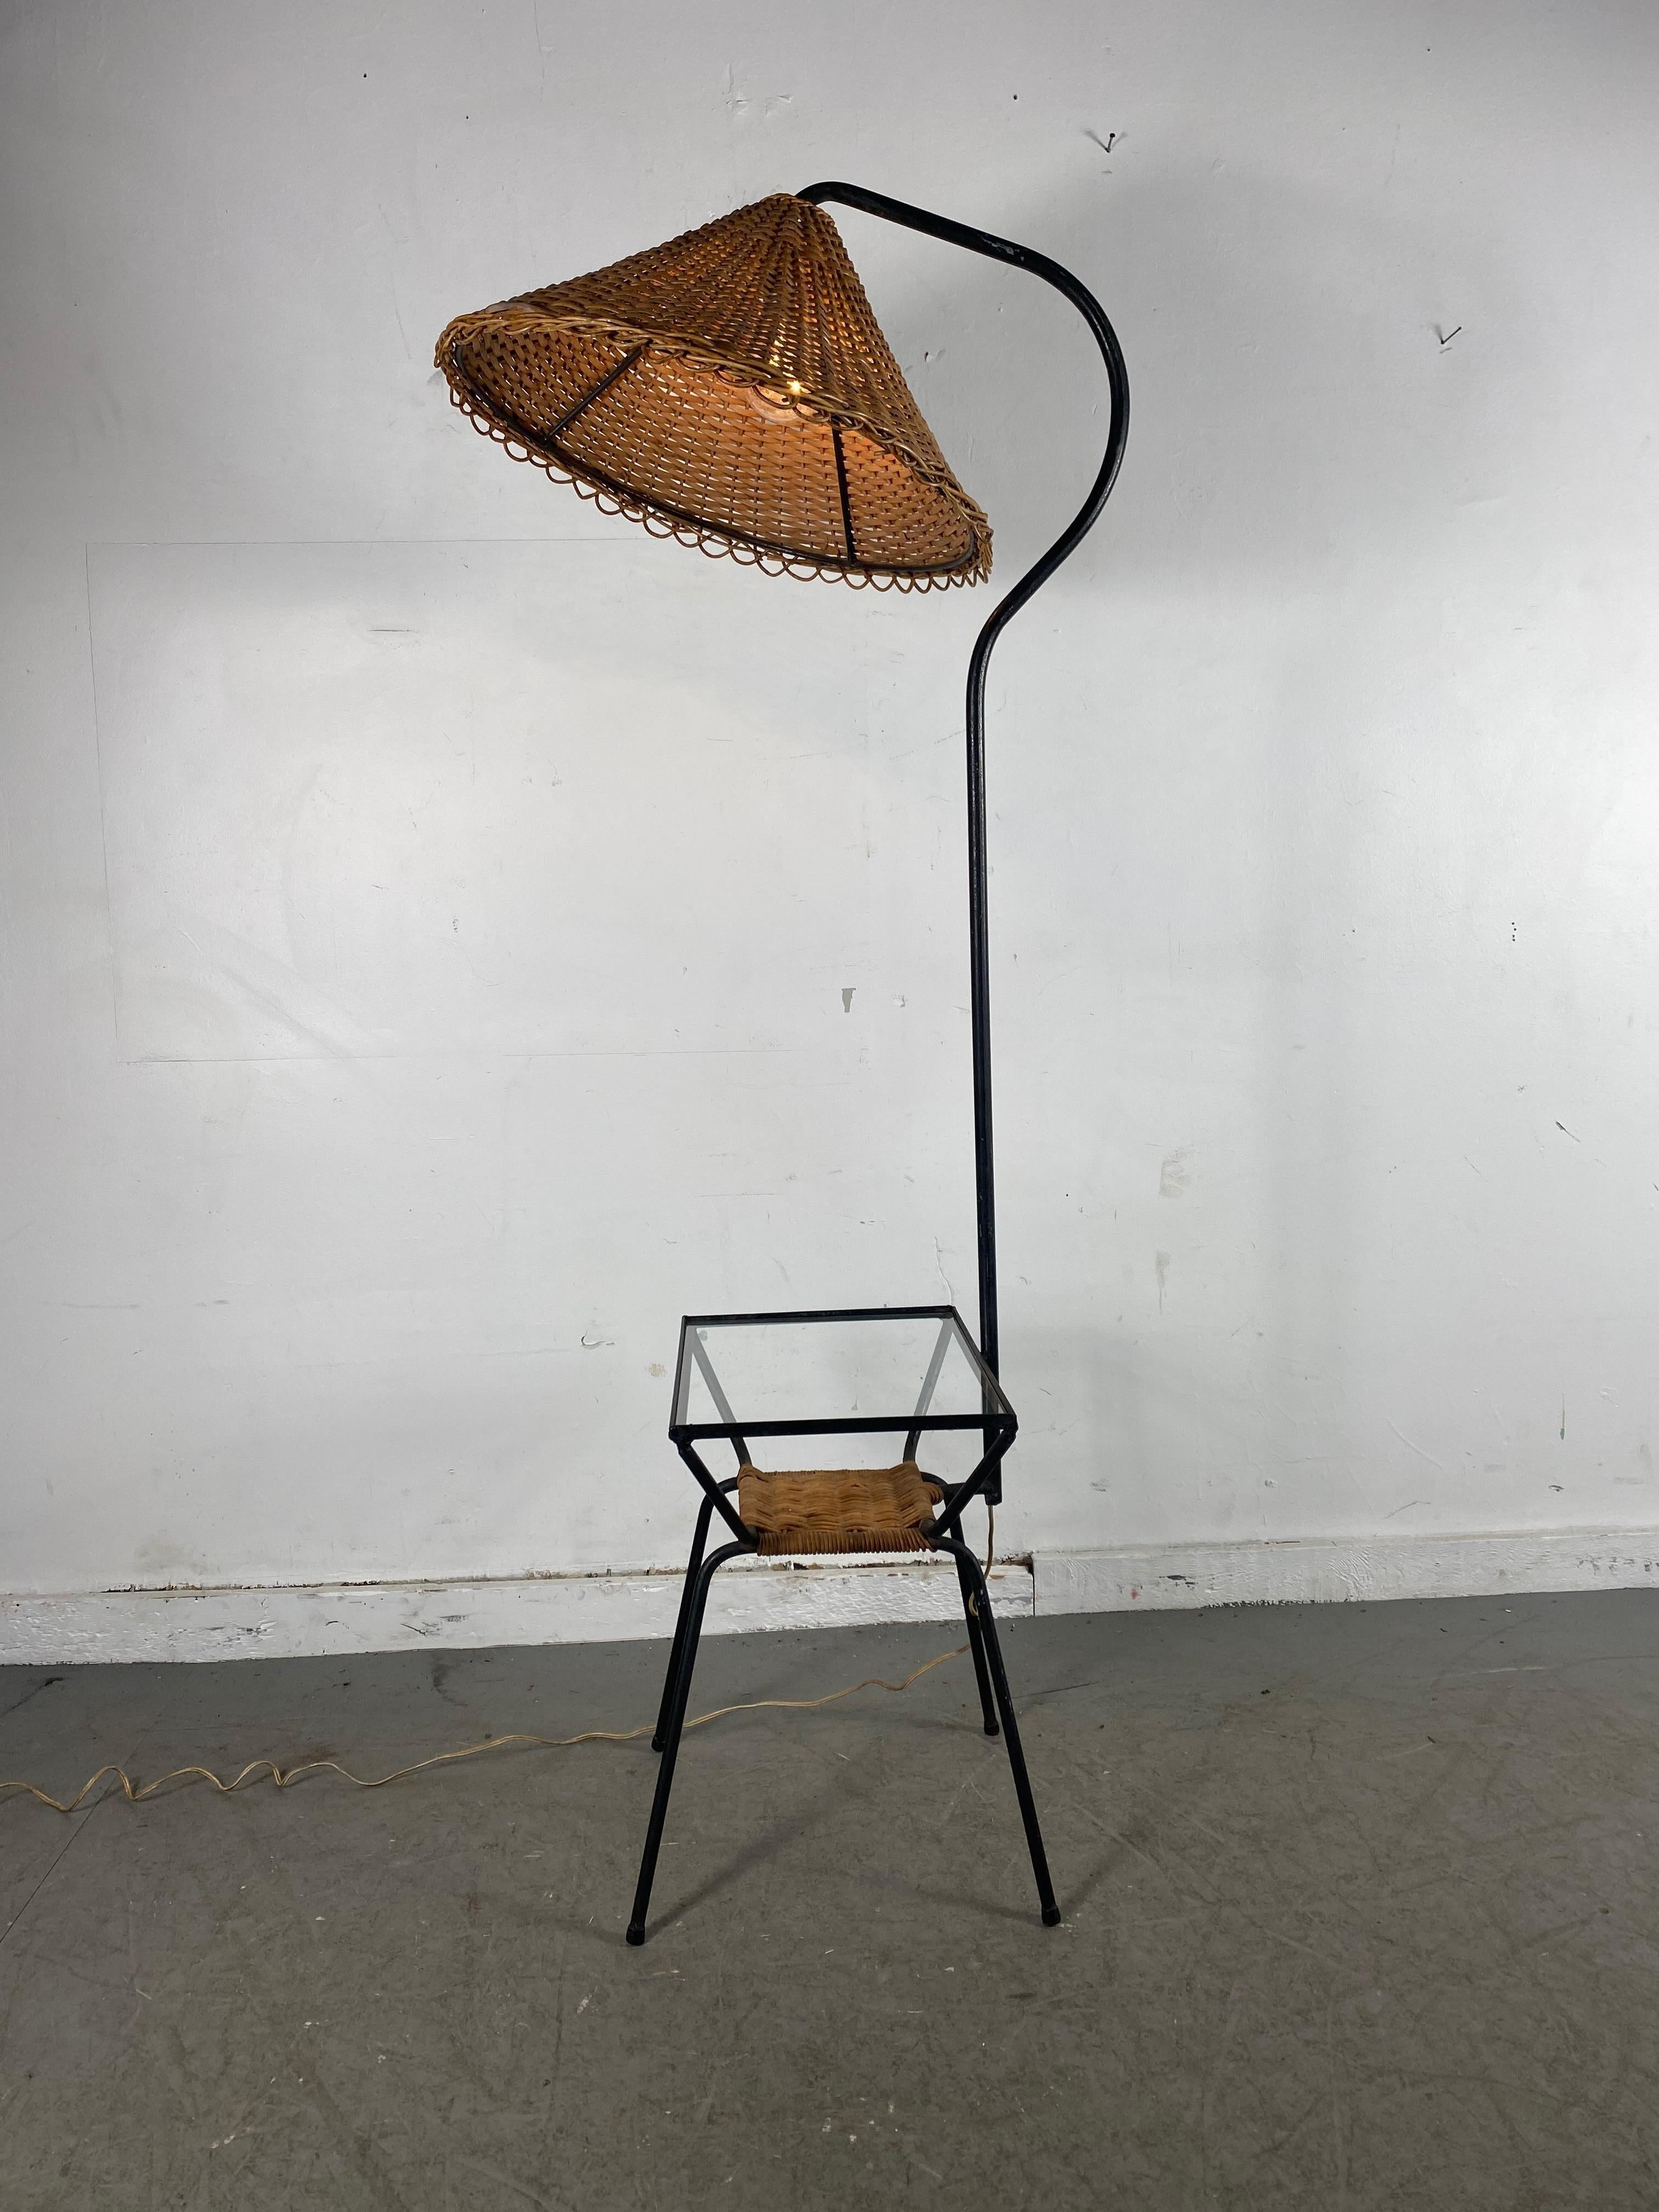 California modernist unusual wicker and iron lamp table, Classic Mid-Century Modern design, attributed to Adrian Pearsall, retains original (fixed) wicker lamp shade as well as original weaved wicker shelf, table with glass top. wicker shade